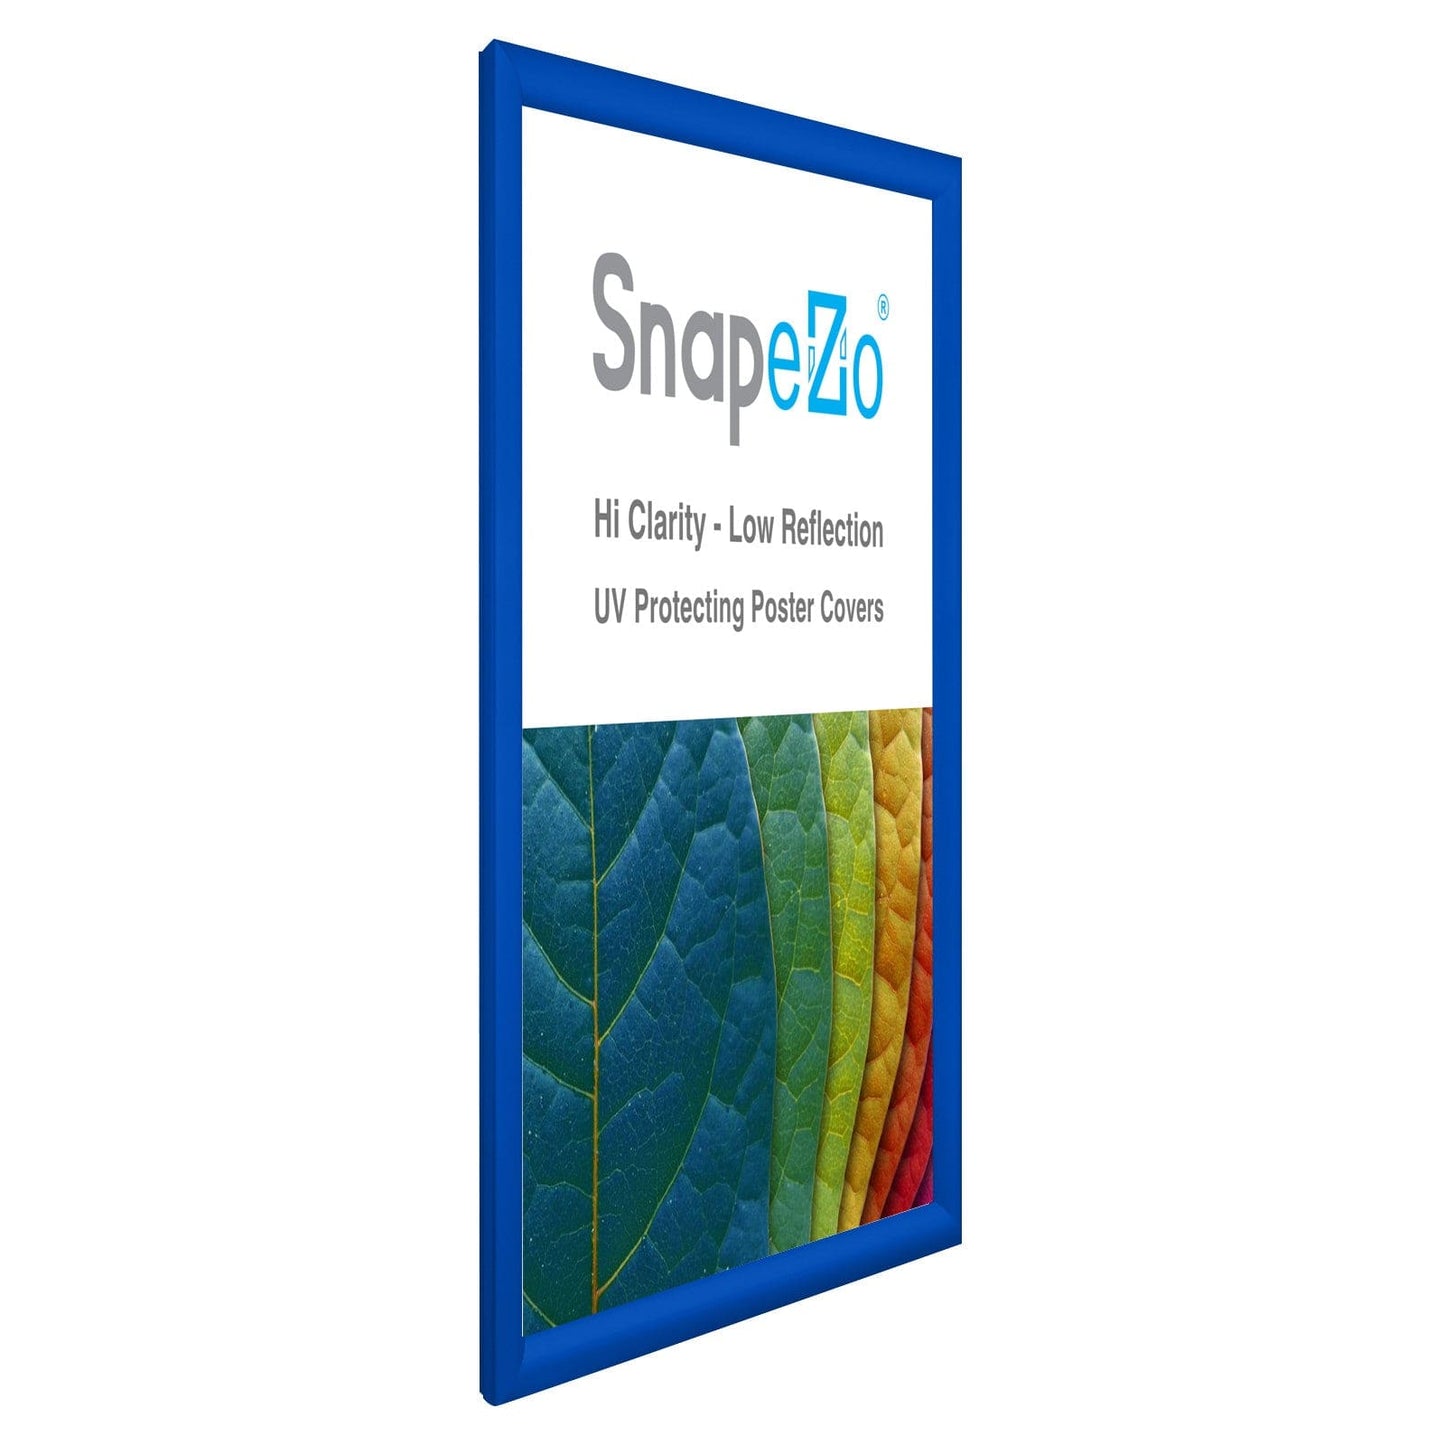 12x16 Blue SnapeZo® Snap Frame - 1.2" Profile - Snap Frames Direct